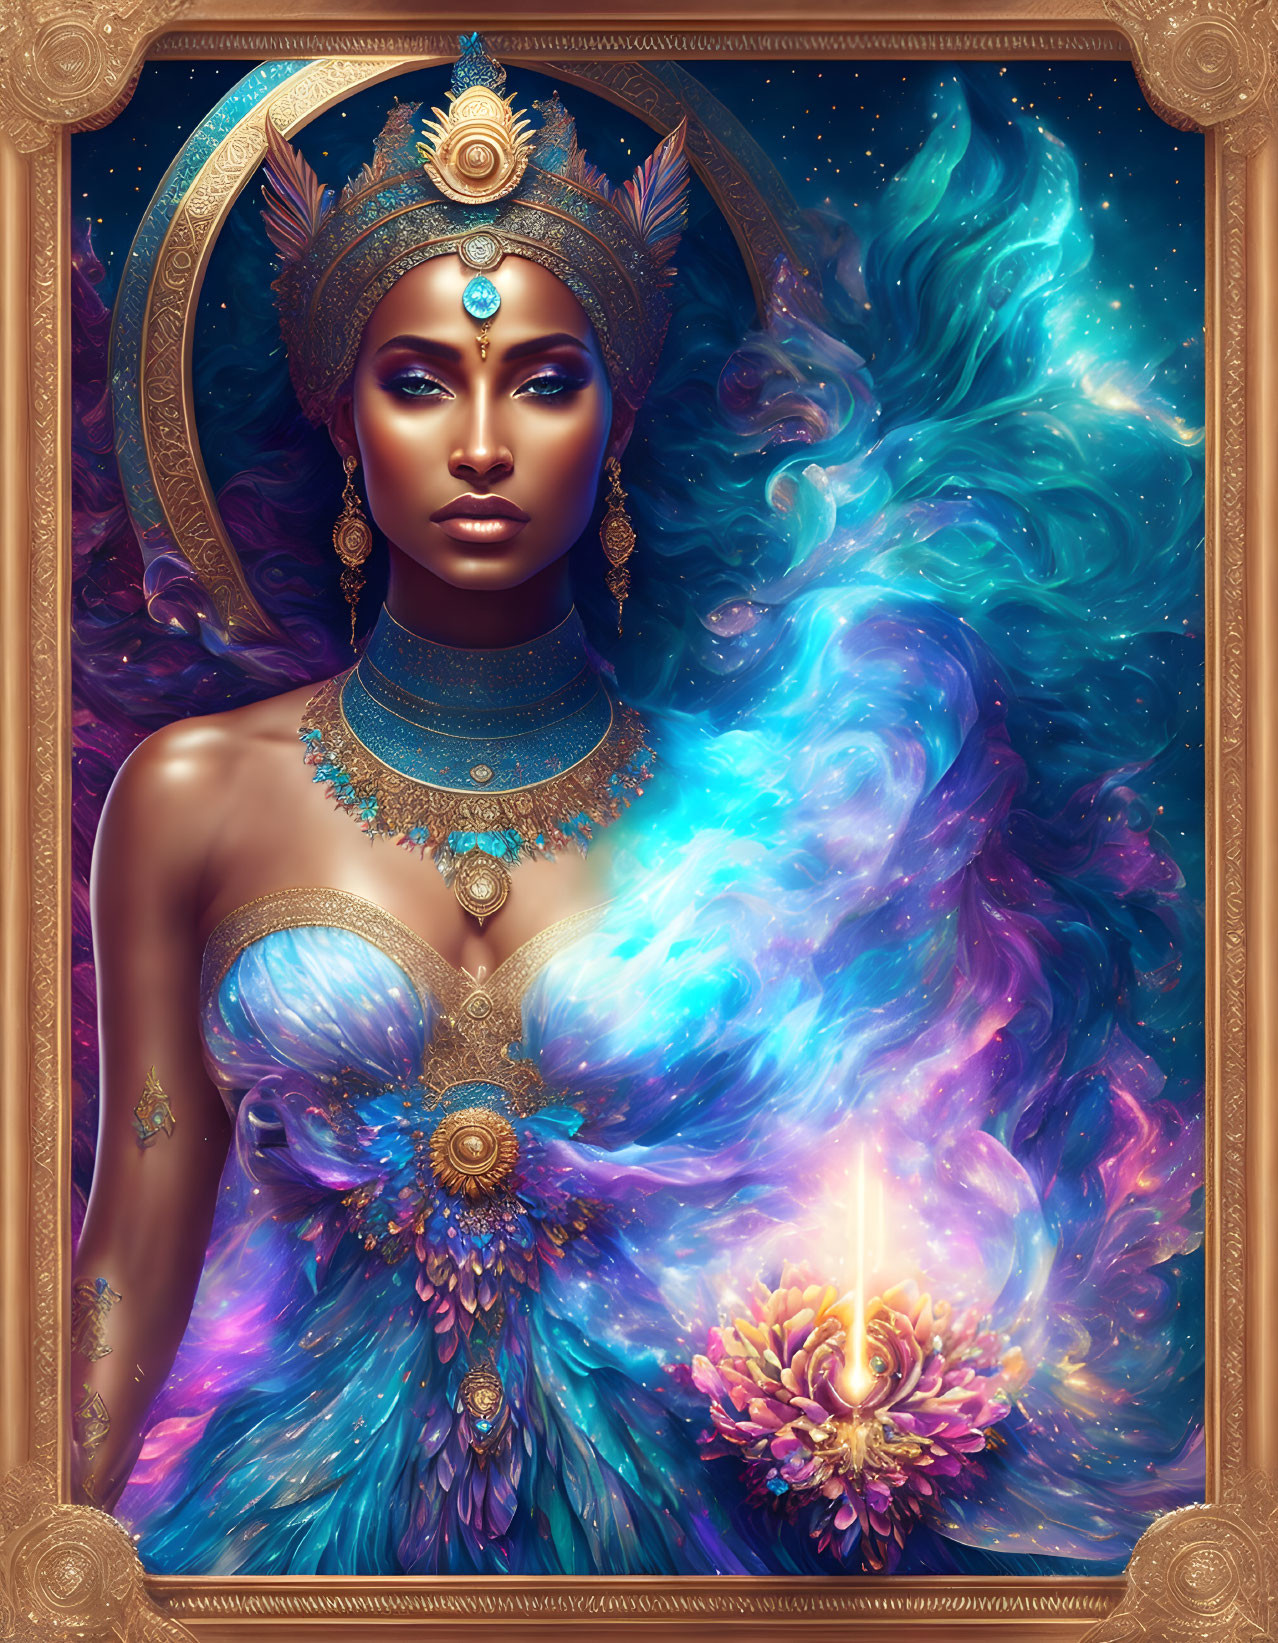 OUR LADY OF THE MANY FORMS - PROMETHEA 08012023